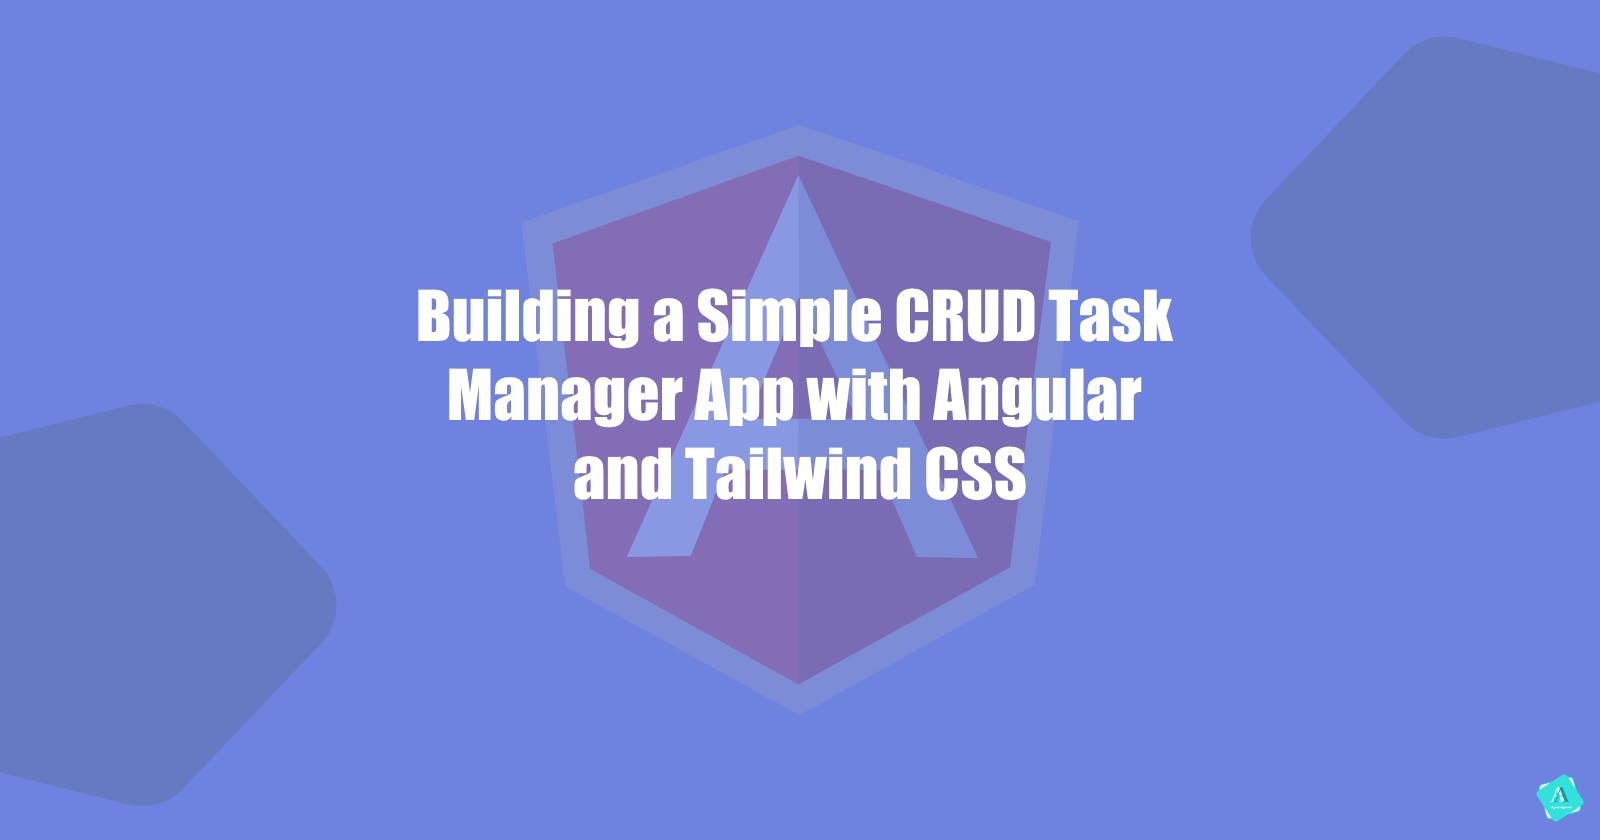 Building a Simple CRUD Task Manager App with Angular: A Step-by-Step Guide for Beginners